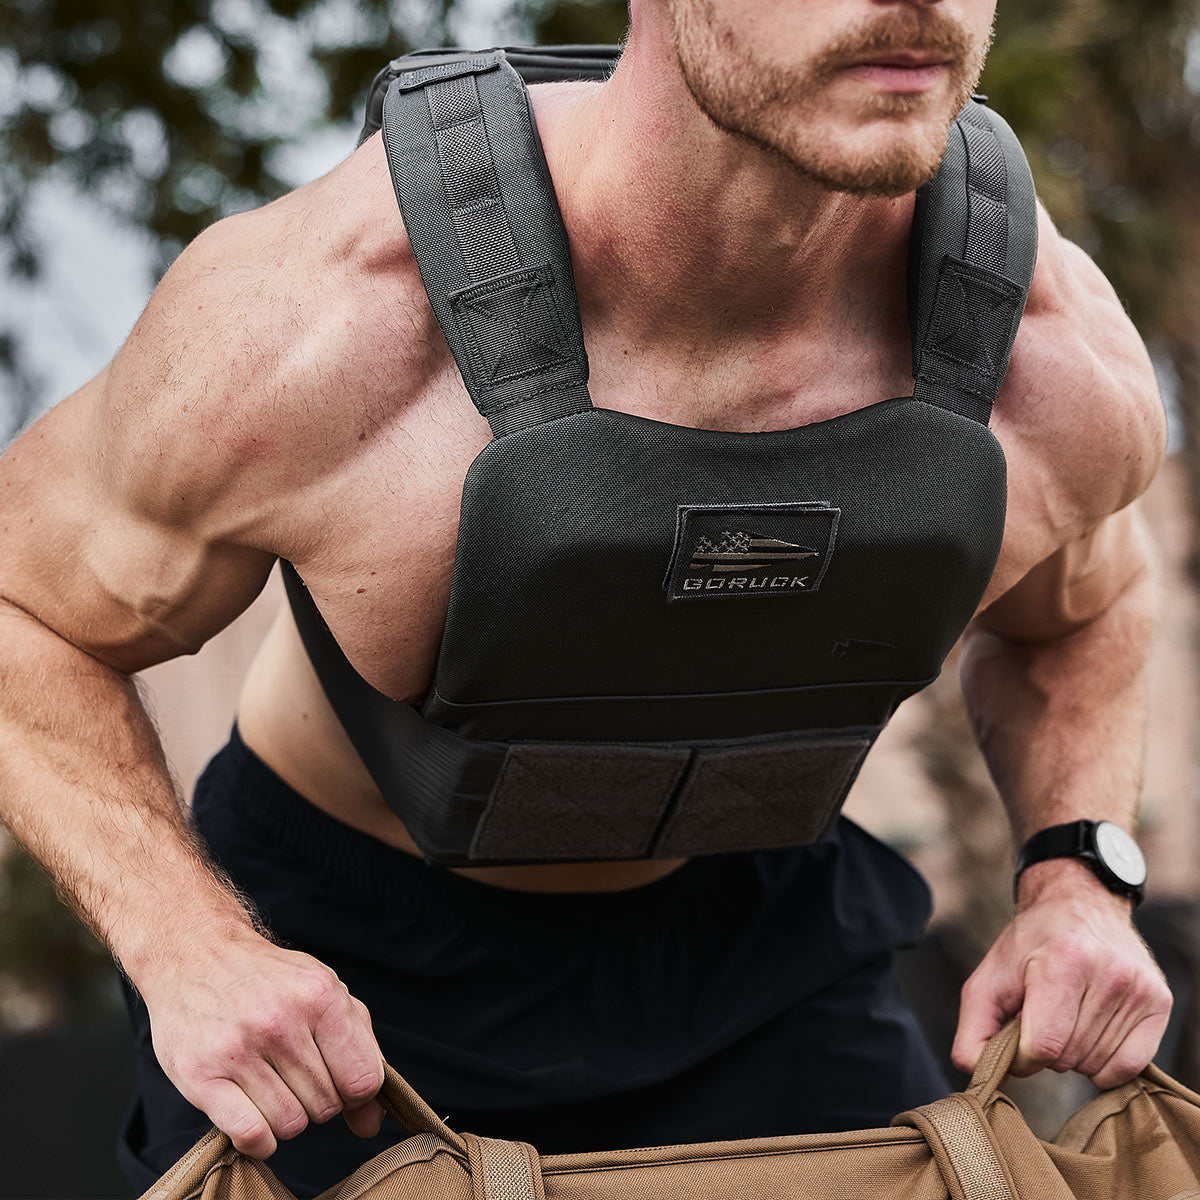 Should You Wear a Weighted Vest for Workouts?